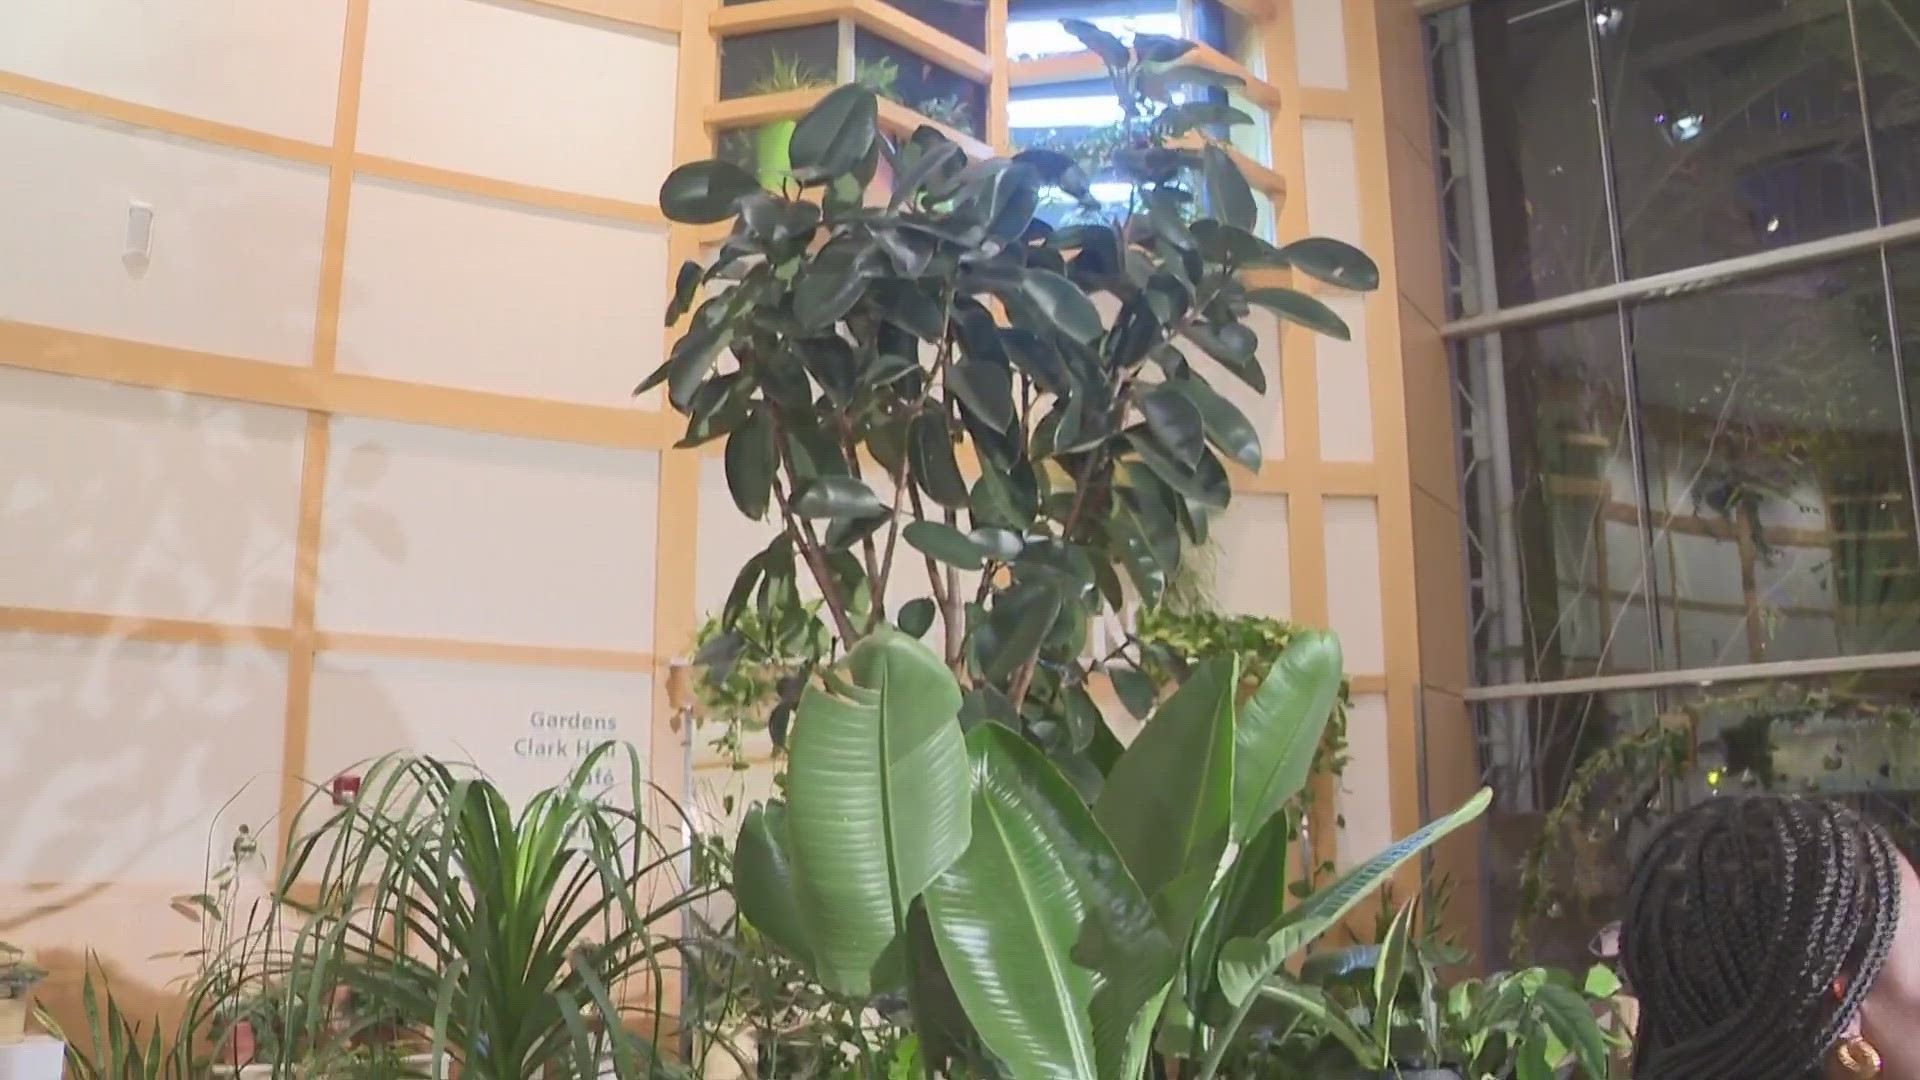 We're exploring the house plant exhibit at the Cleveland Botanical Garden with 3News' Kierra Cotton.